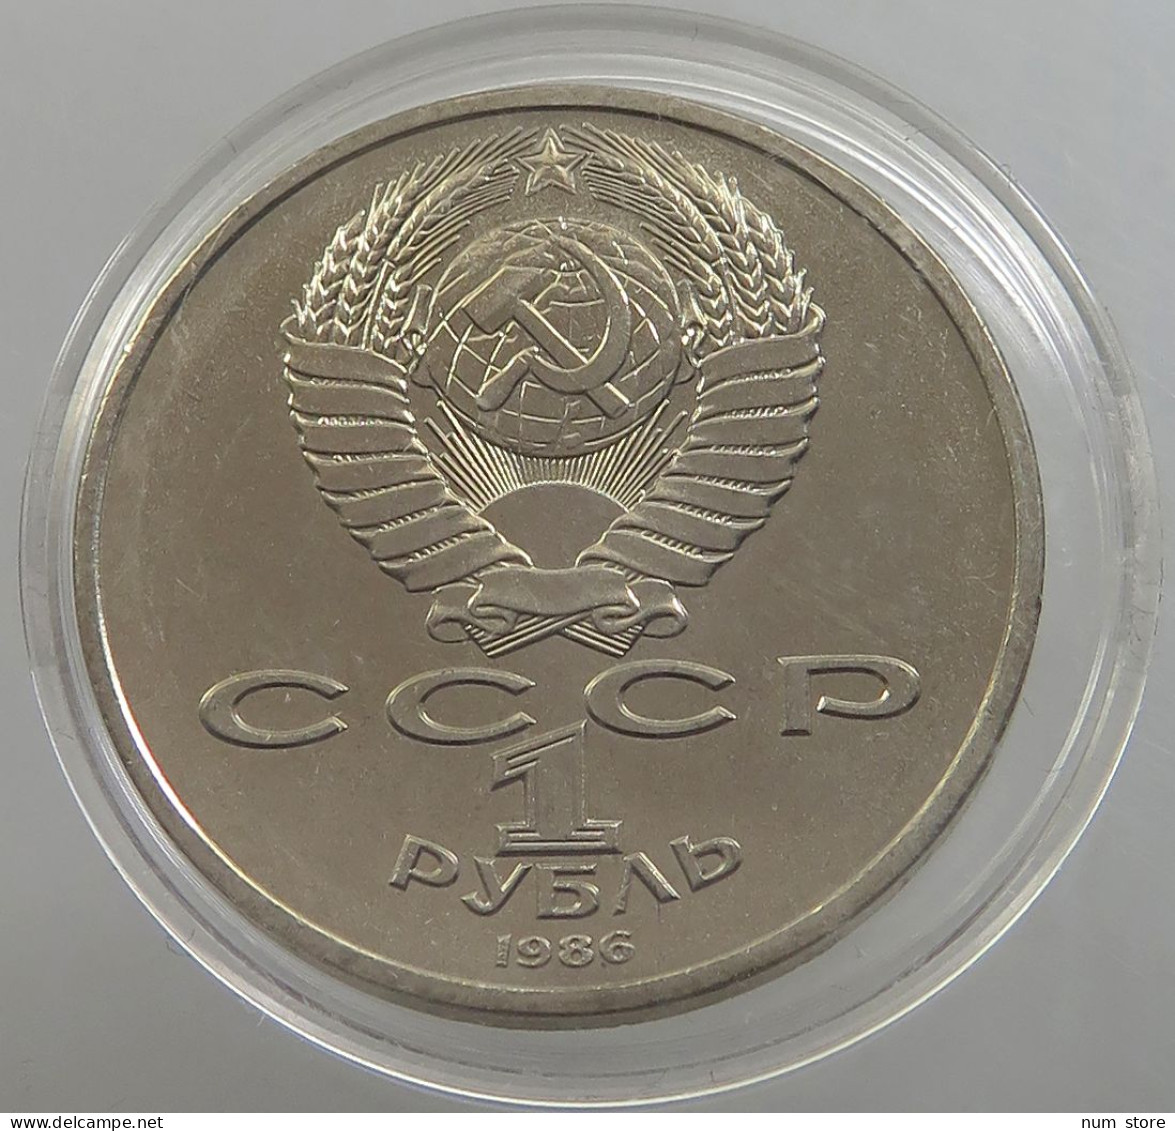 RUSSIA USSR 1 ROUBLE 1986 #sm14 0629 - Russland